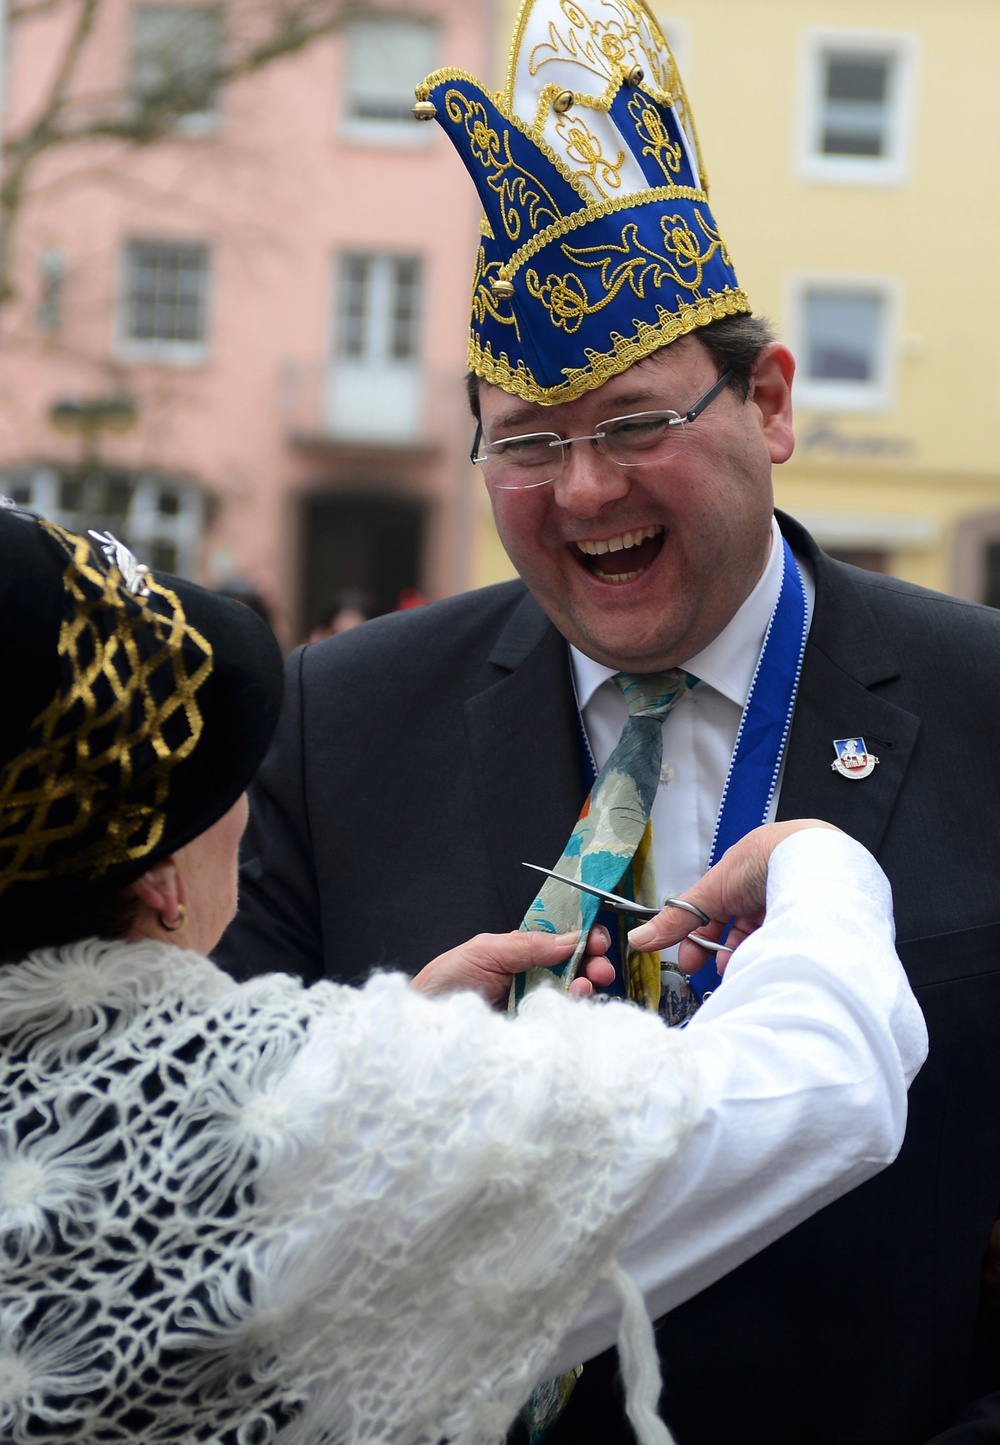 Leadership participates in local Fasching events